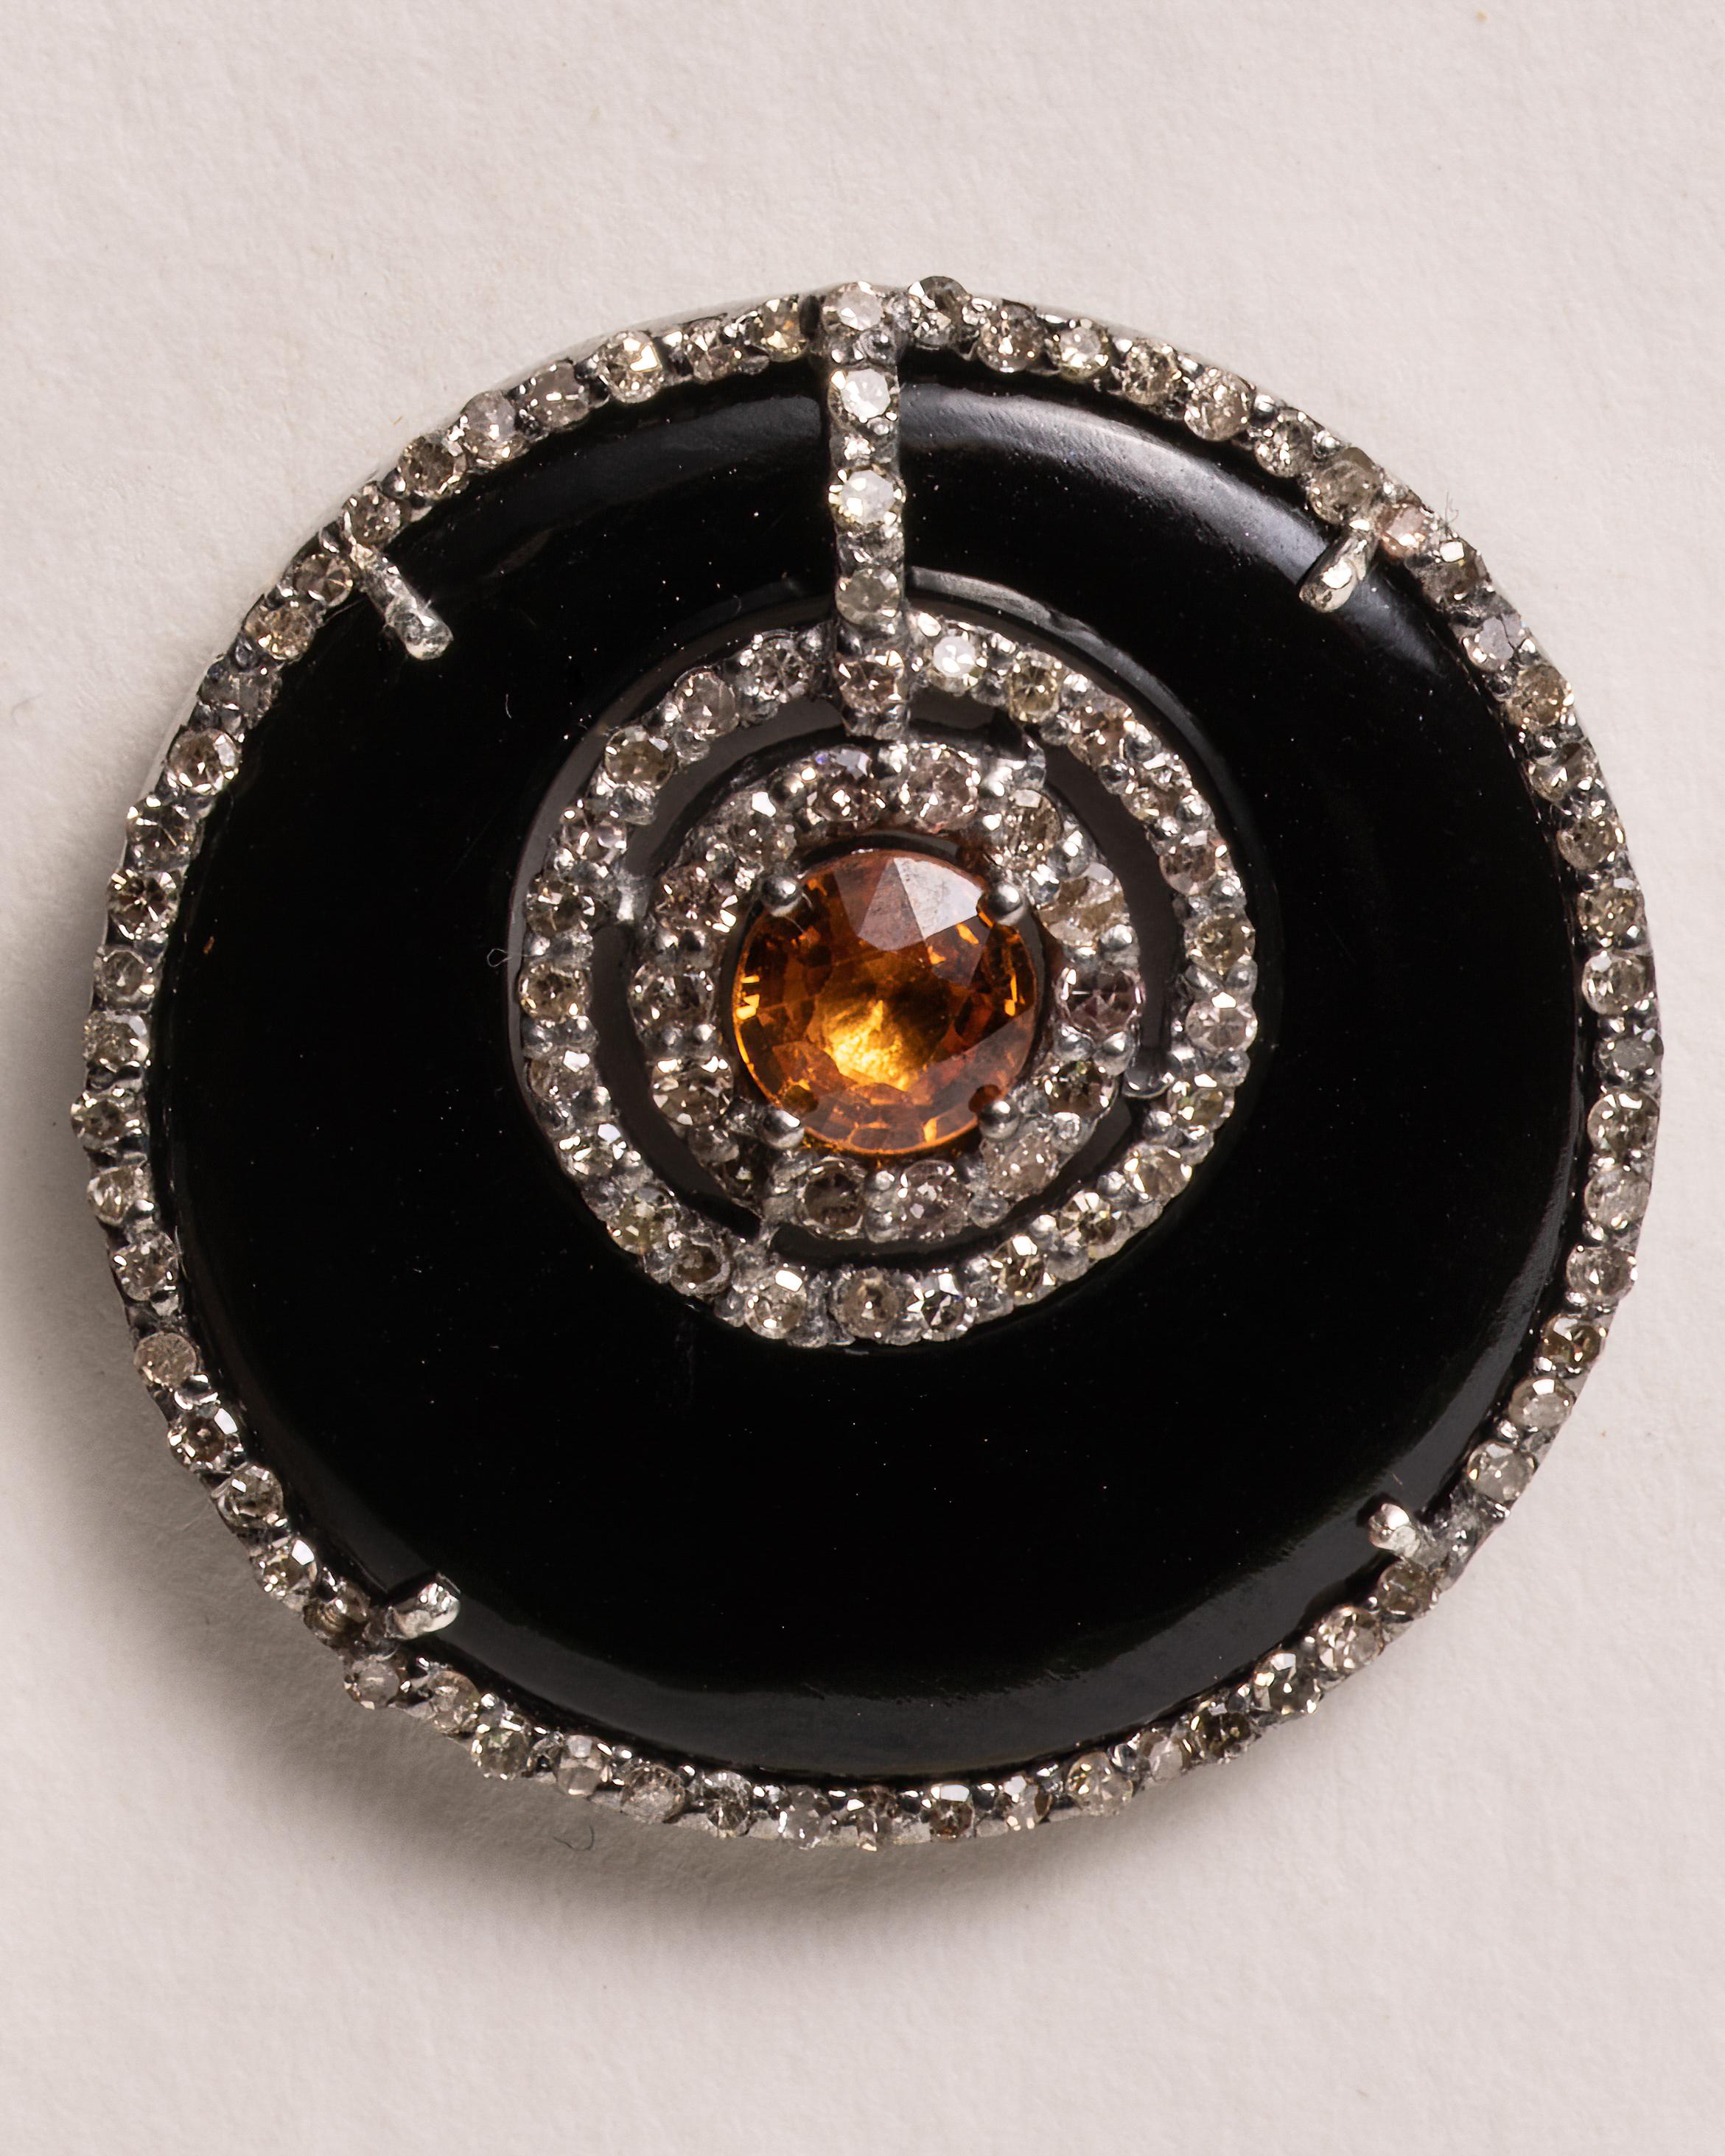 A pair of round stud earrings of black onyx with a round, faceted orange sapphire and both bordered with pave`-set round, brilliant cut diamonds.   Set in sterling silver with an 18K gold post for pierced ears.  Diamonds total 1.3 carats, the black